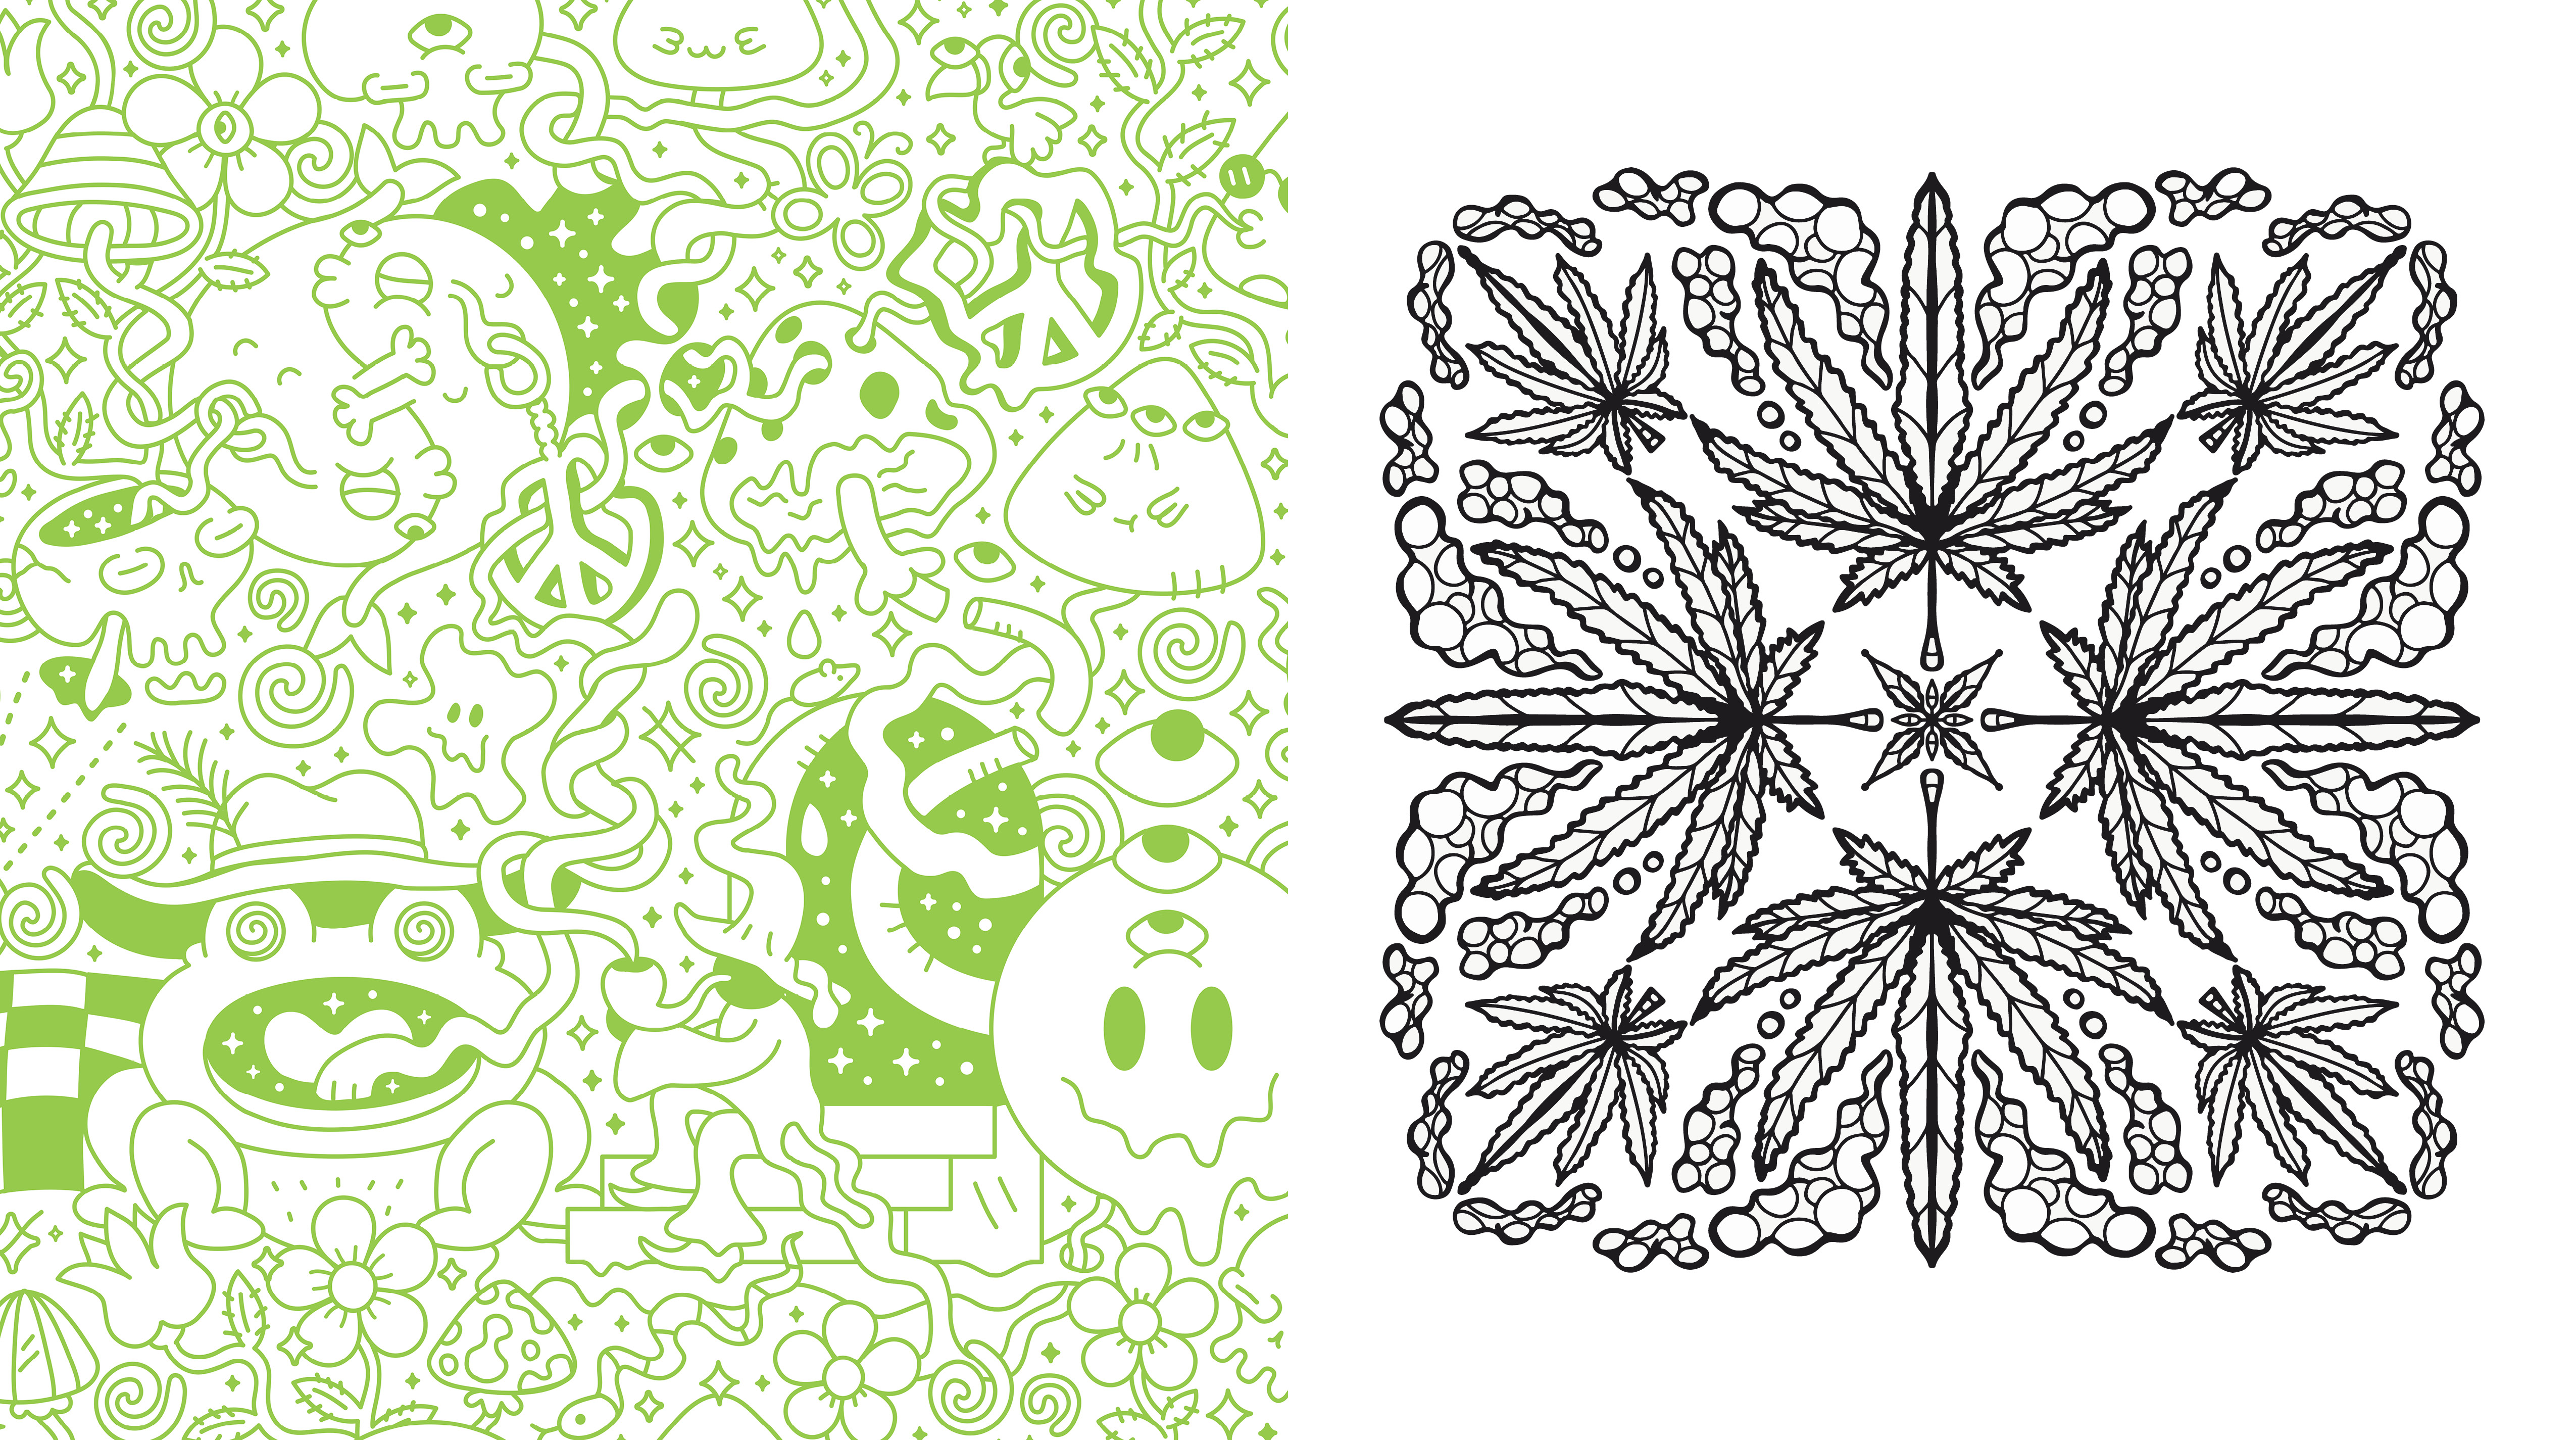 Weed coloring book by editors of chartwell books at a glance the group